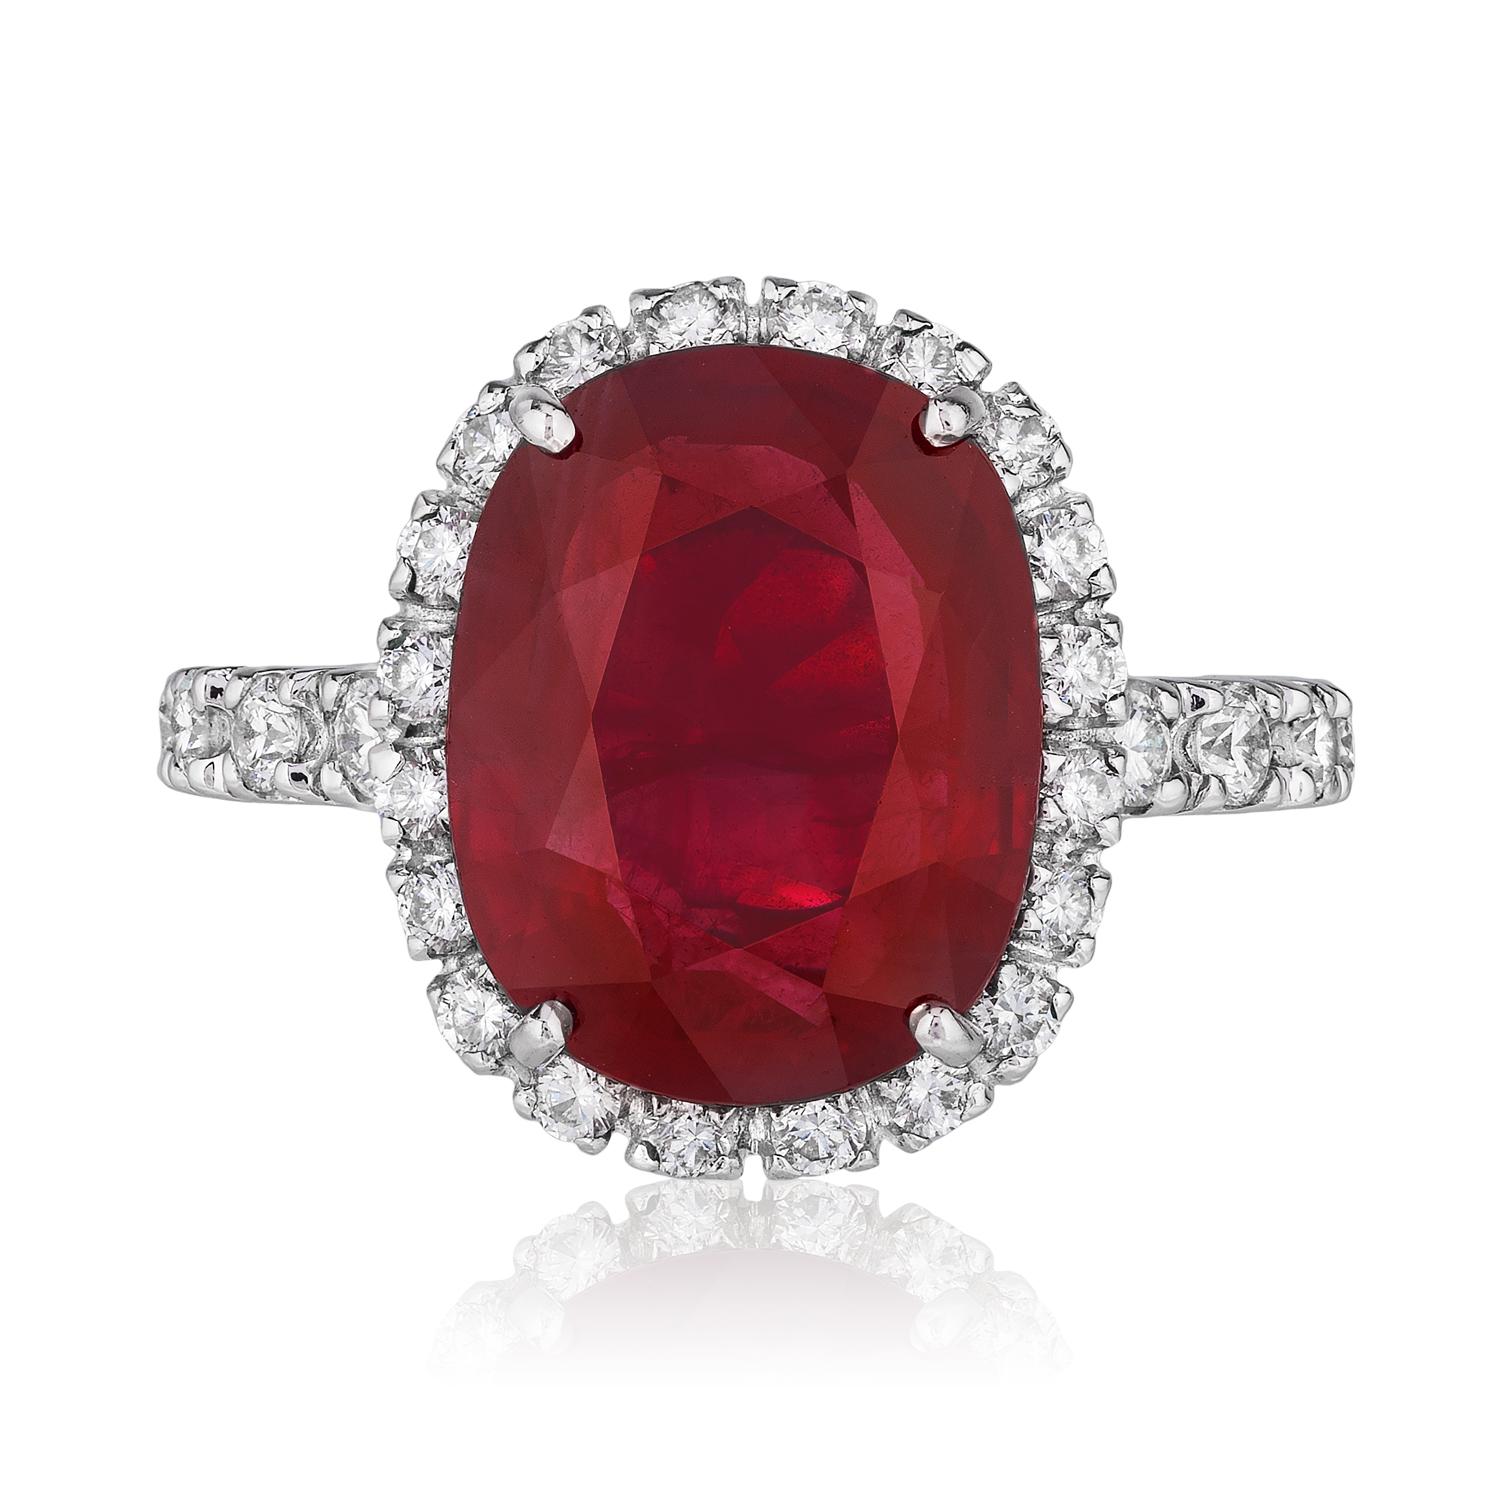 Andreoli 8.28 Carat Burma Certified Ruby Diamond 18 Karat White Gold Ring

This ring features:
- 1.28 Carat Diamond
- 8.28 Carat Ruby Burma Certified
- 18K White Gold
- Made In Italy